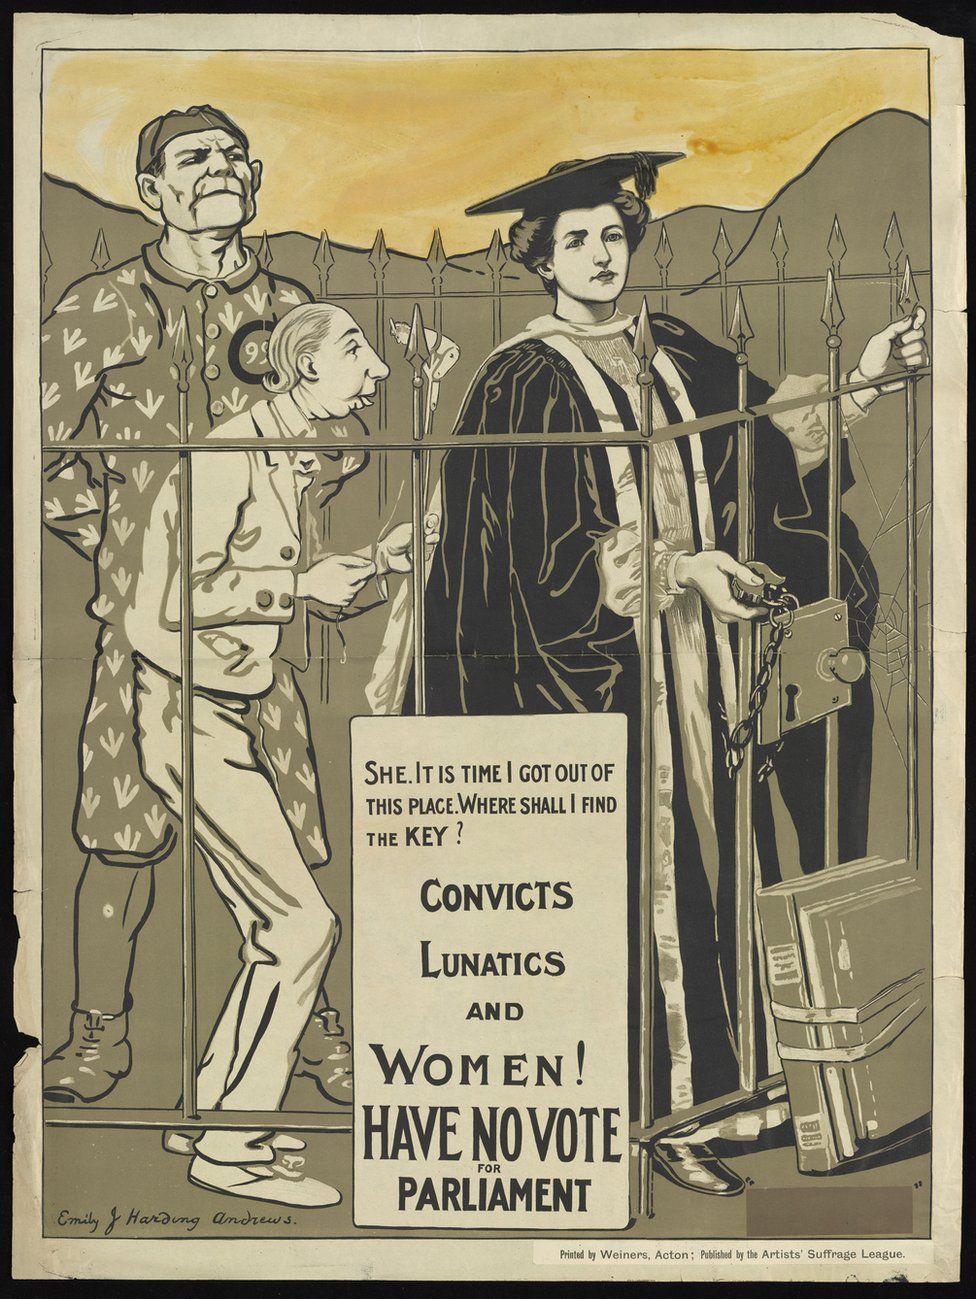 Convicts, Lunatics and Women! poster from 1908.